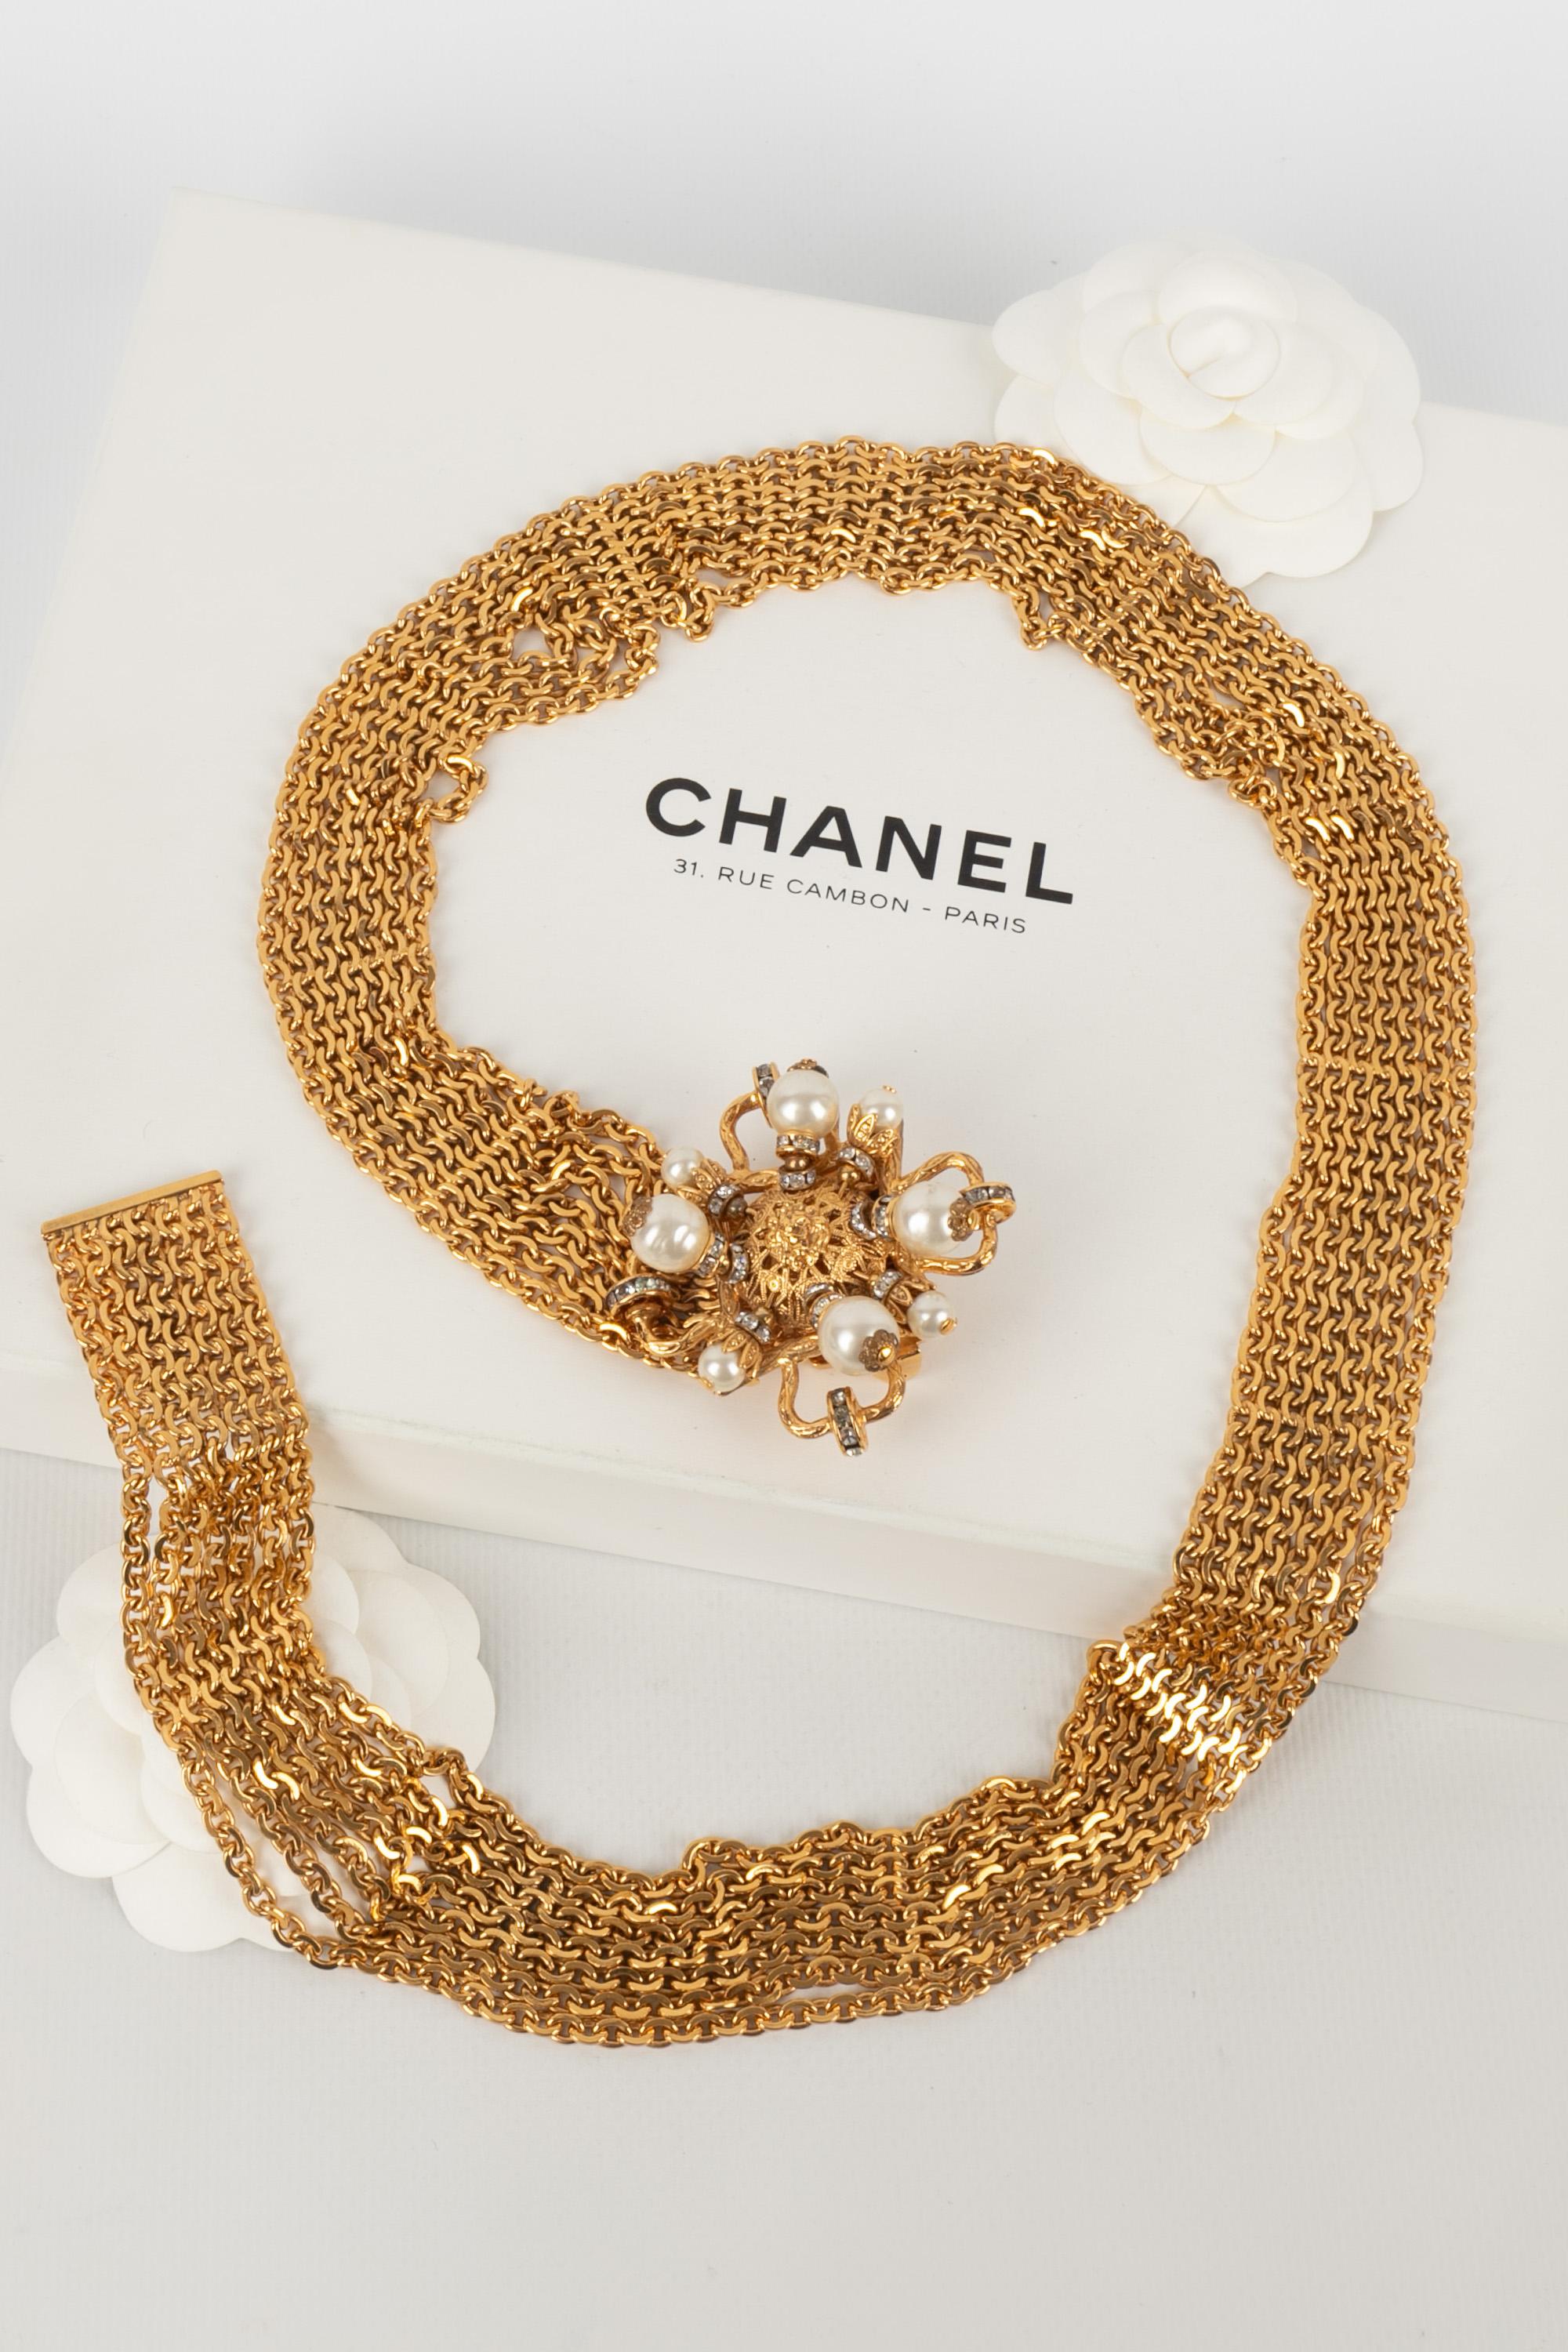 CHANEL - (Made in France) Golden metal belt with rhinestone rings and costume pearls. 1996 Spring-Summer Collection.

Condition:
Very good condition

Dimensions:
Length: 80 cm

CCB81